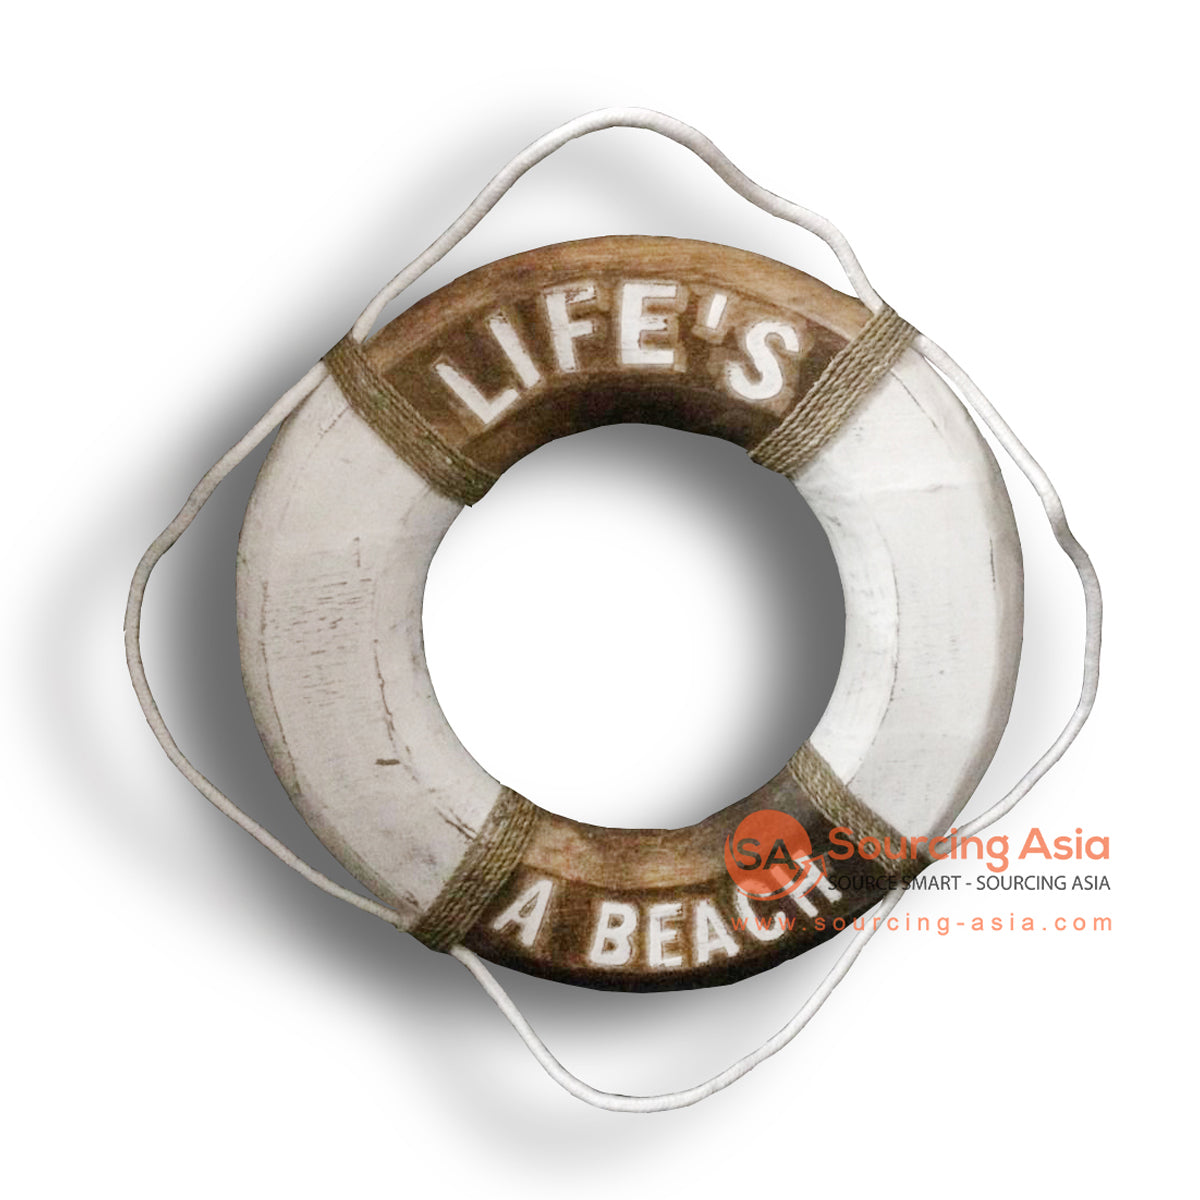 MTIB004 WOODEN BUOY RING WALL DECORATION WITH "LIFE'S A BEACH" SIGN